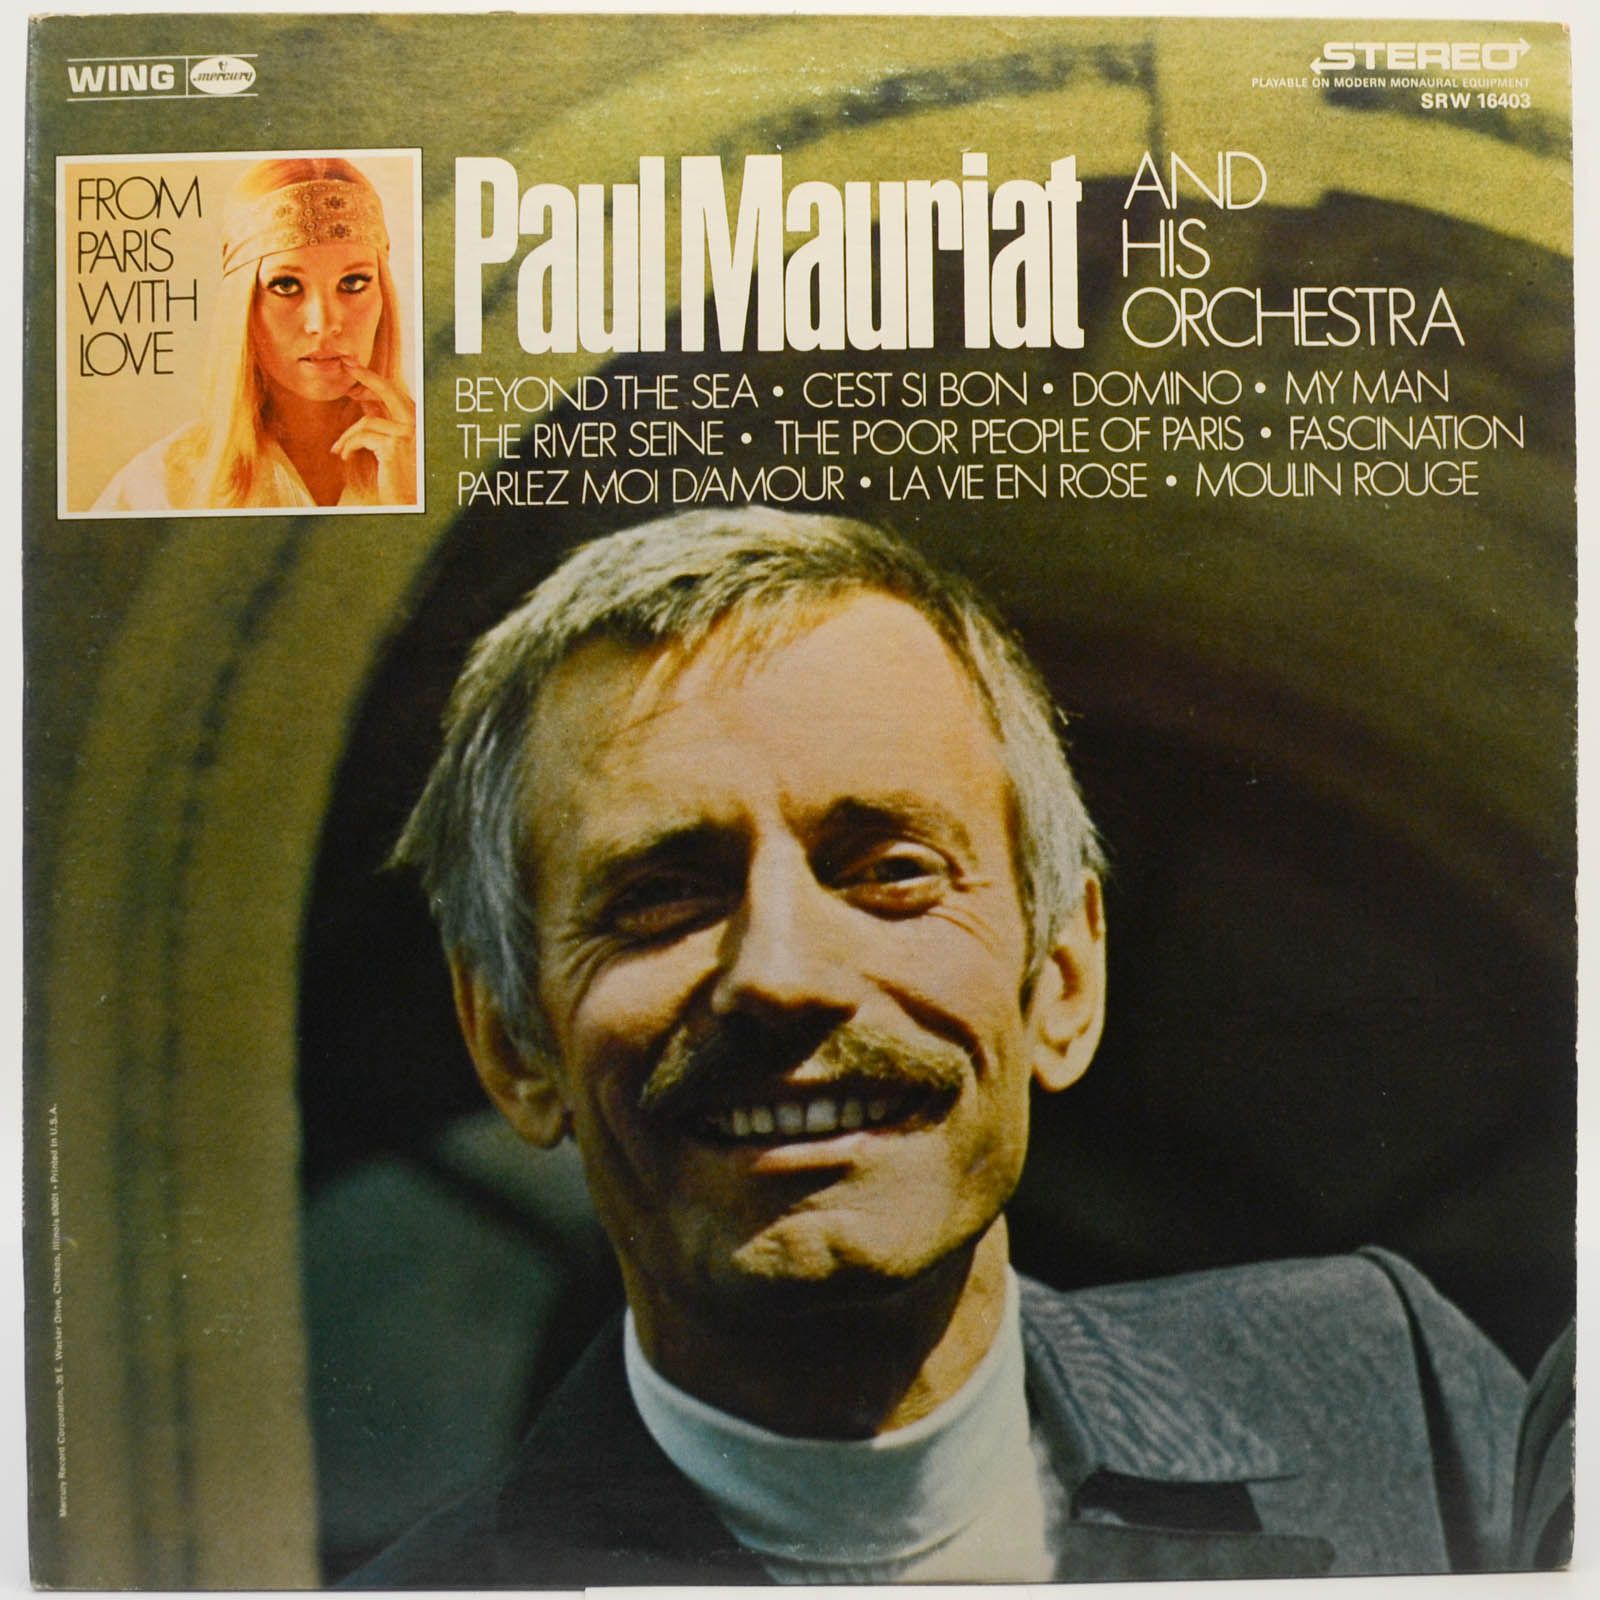 Paul Mauriat And His Orchestra — From Paris With Love (USA), 1966